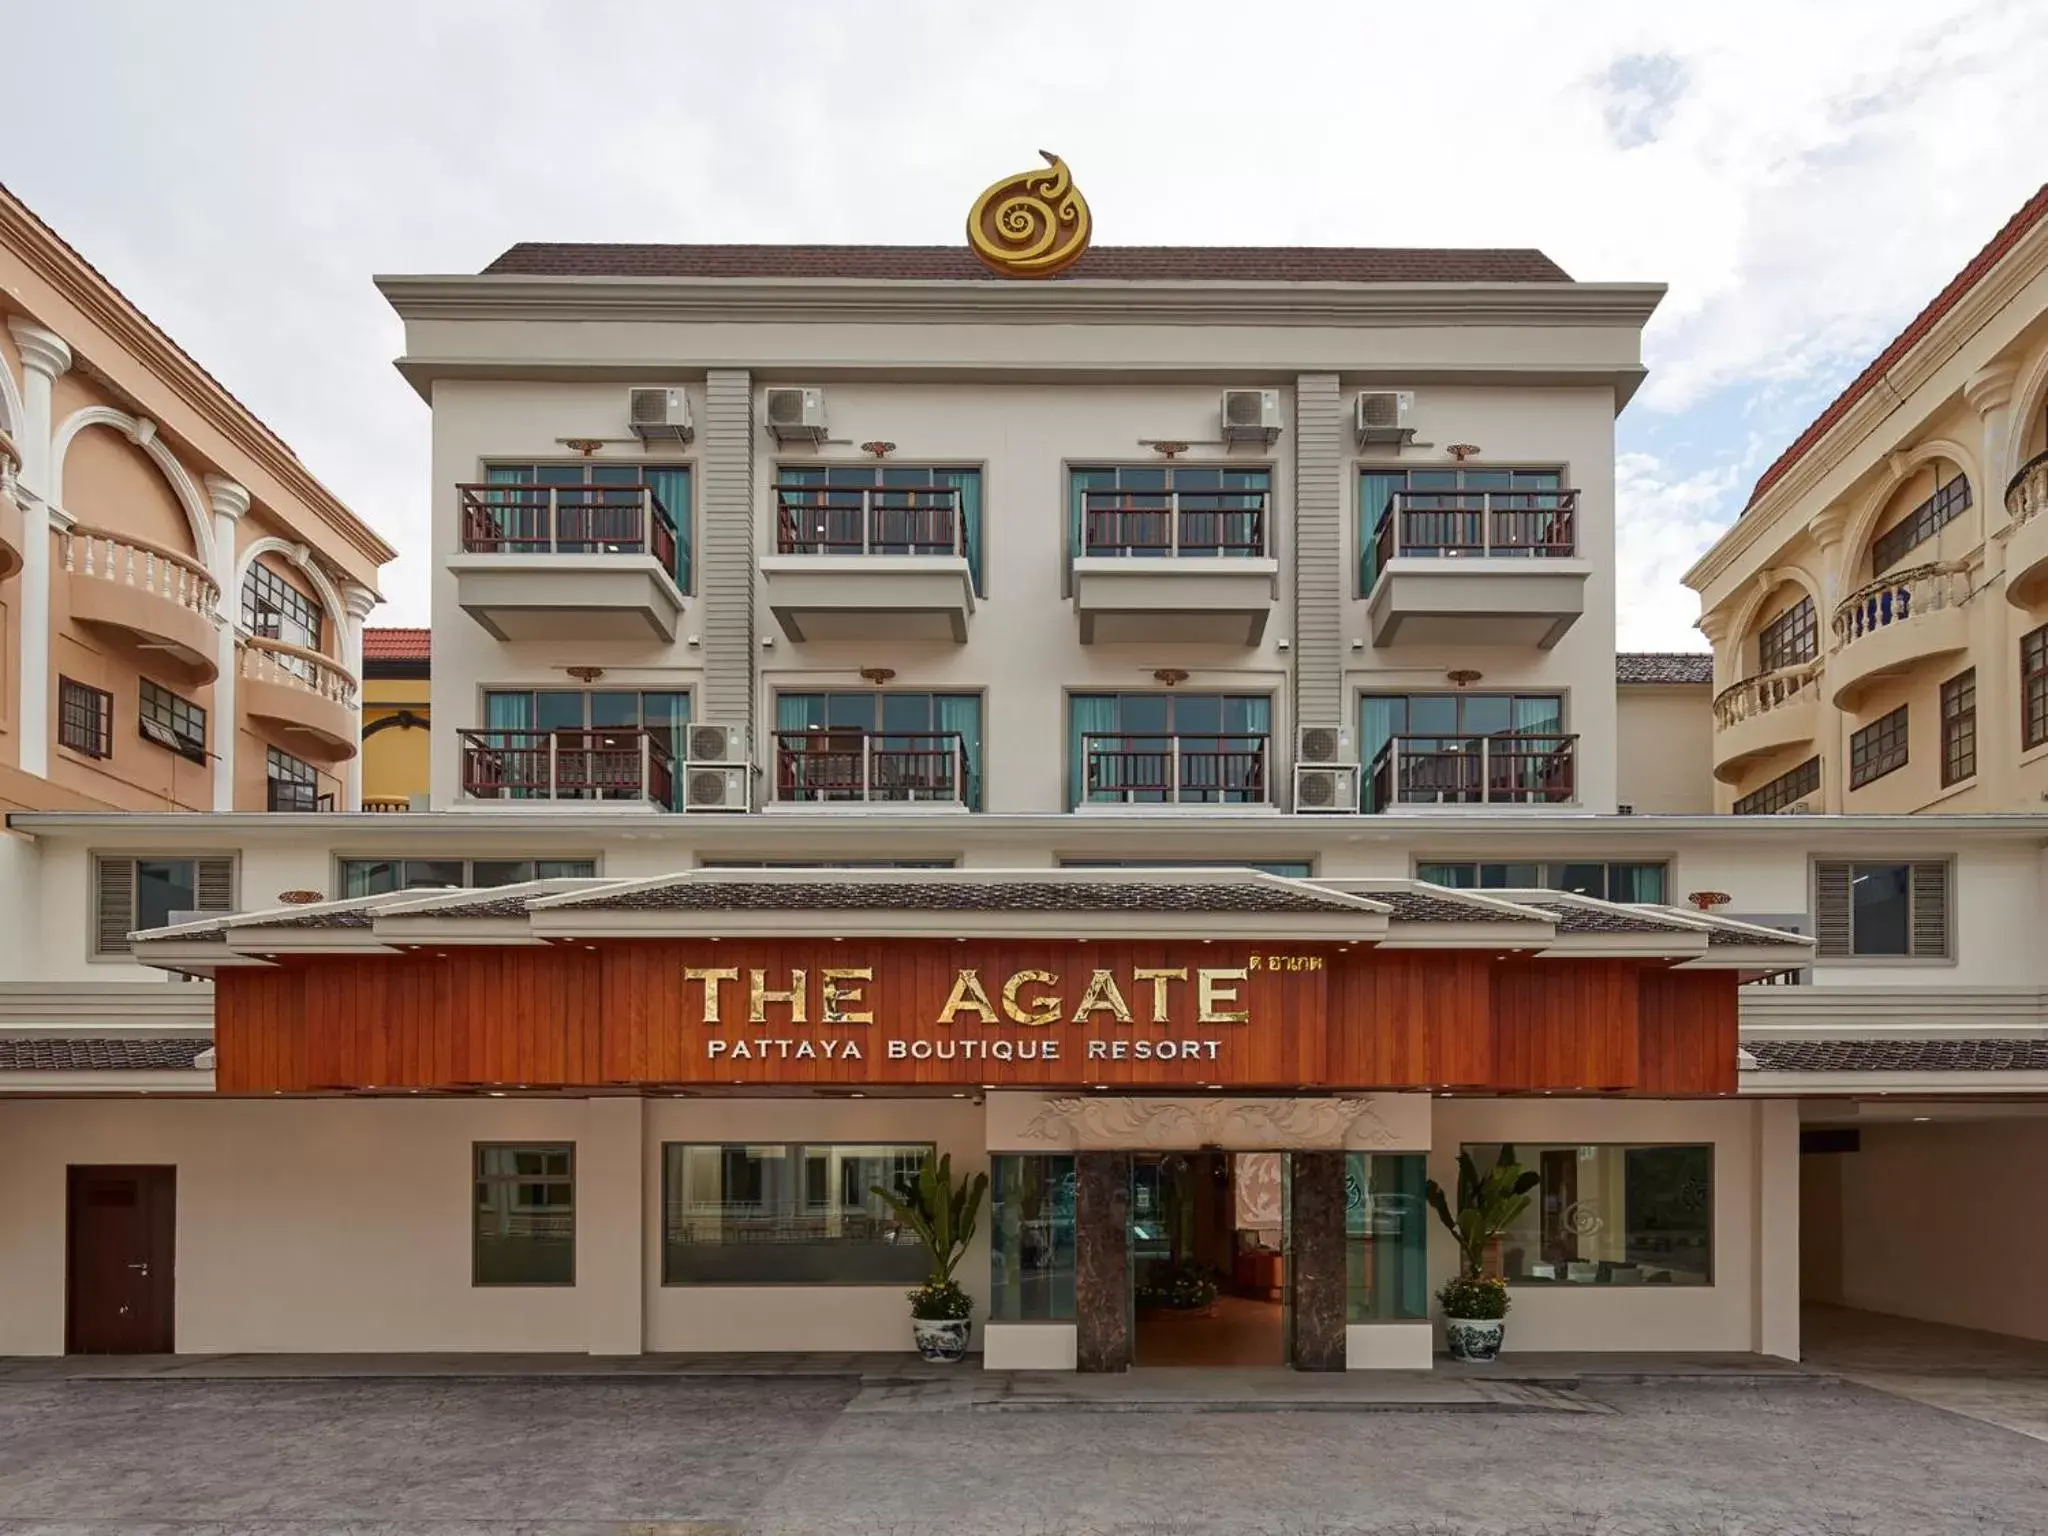 Facade/entrance, Property Building in The Agate Pattaya Boutique Resort